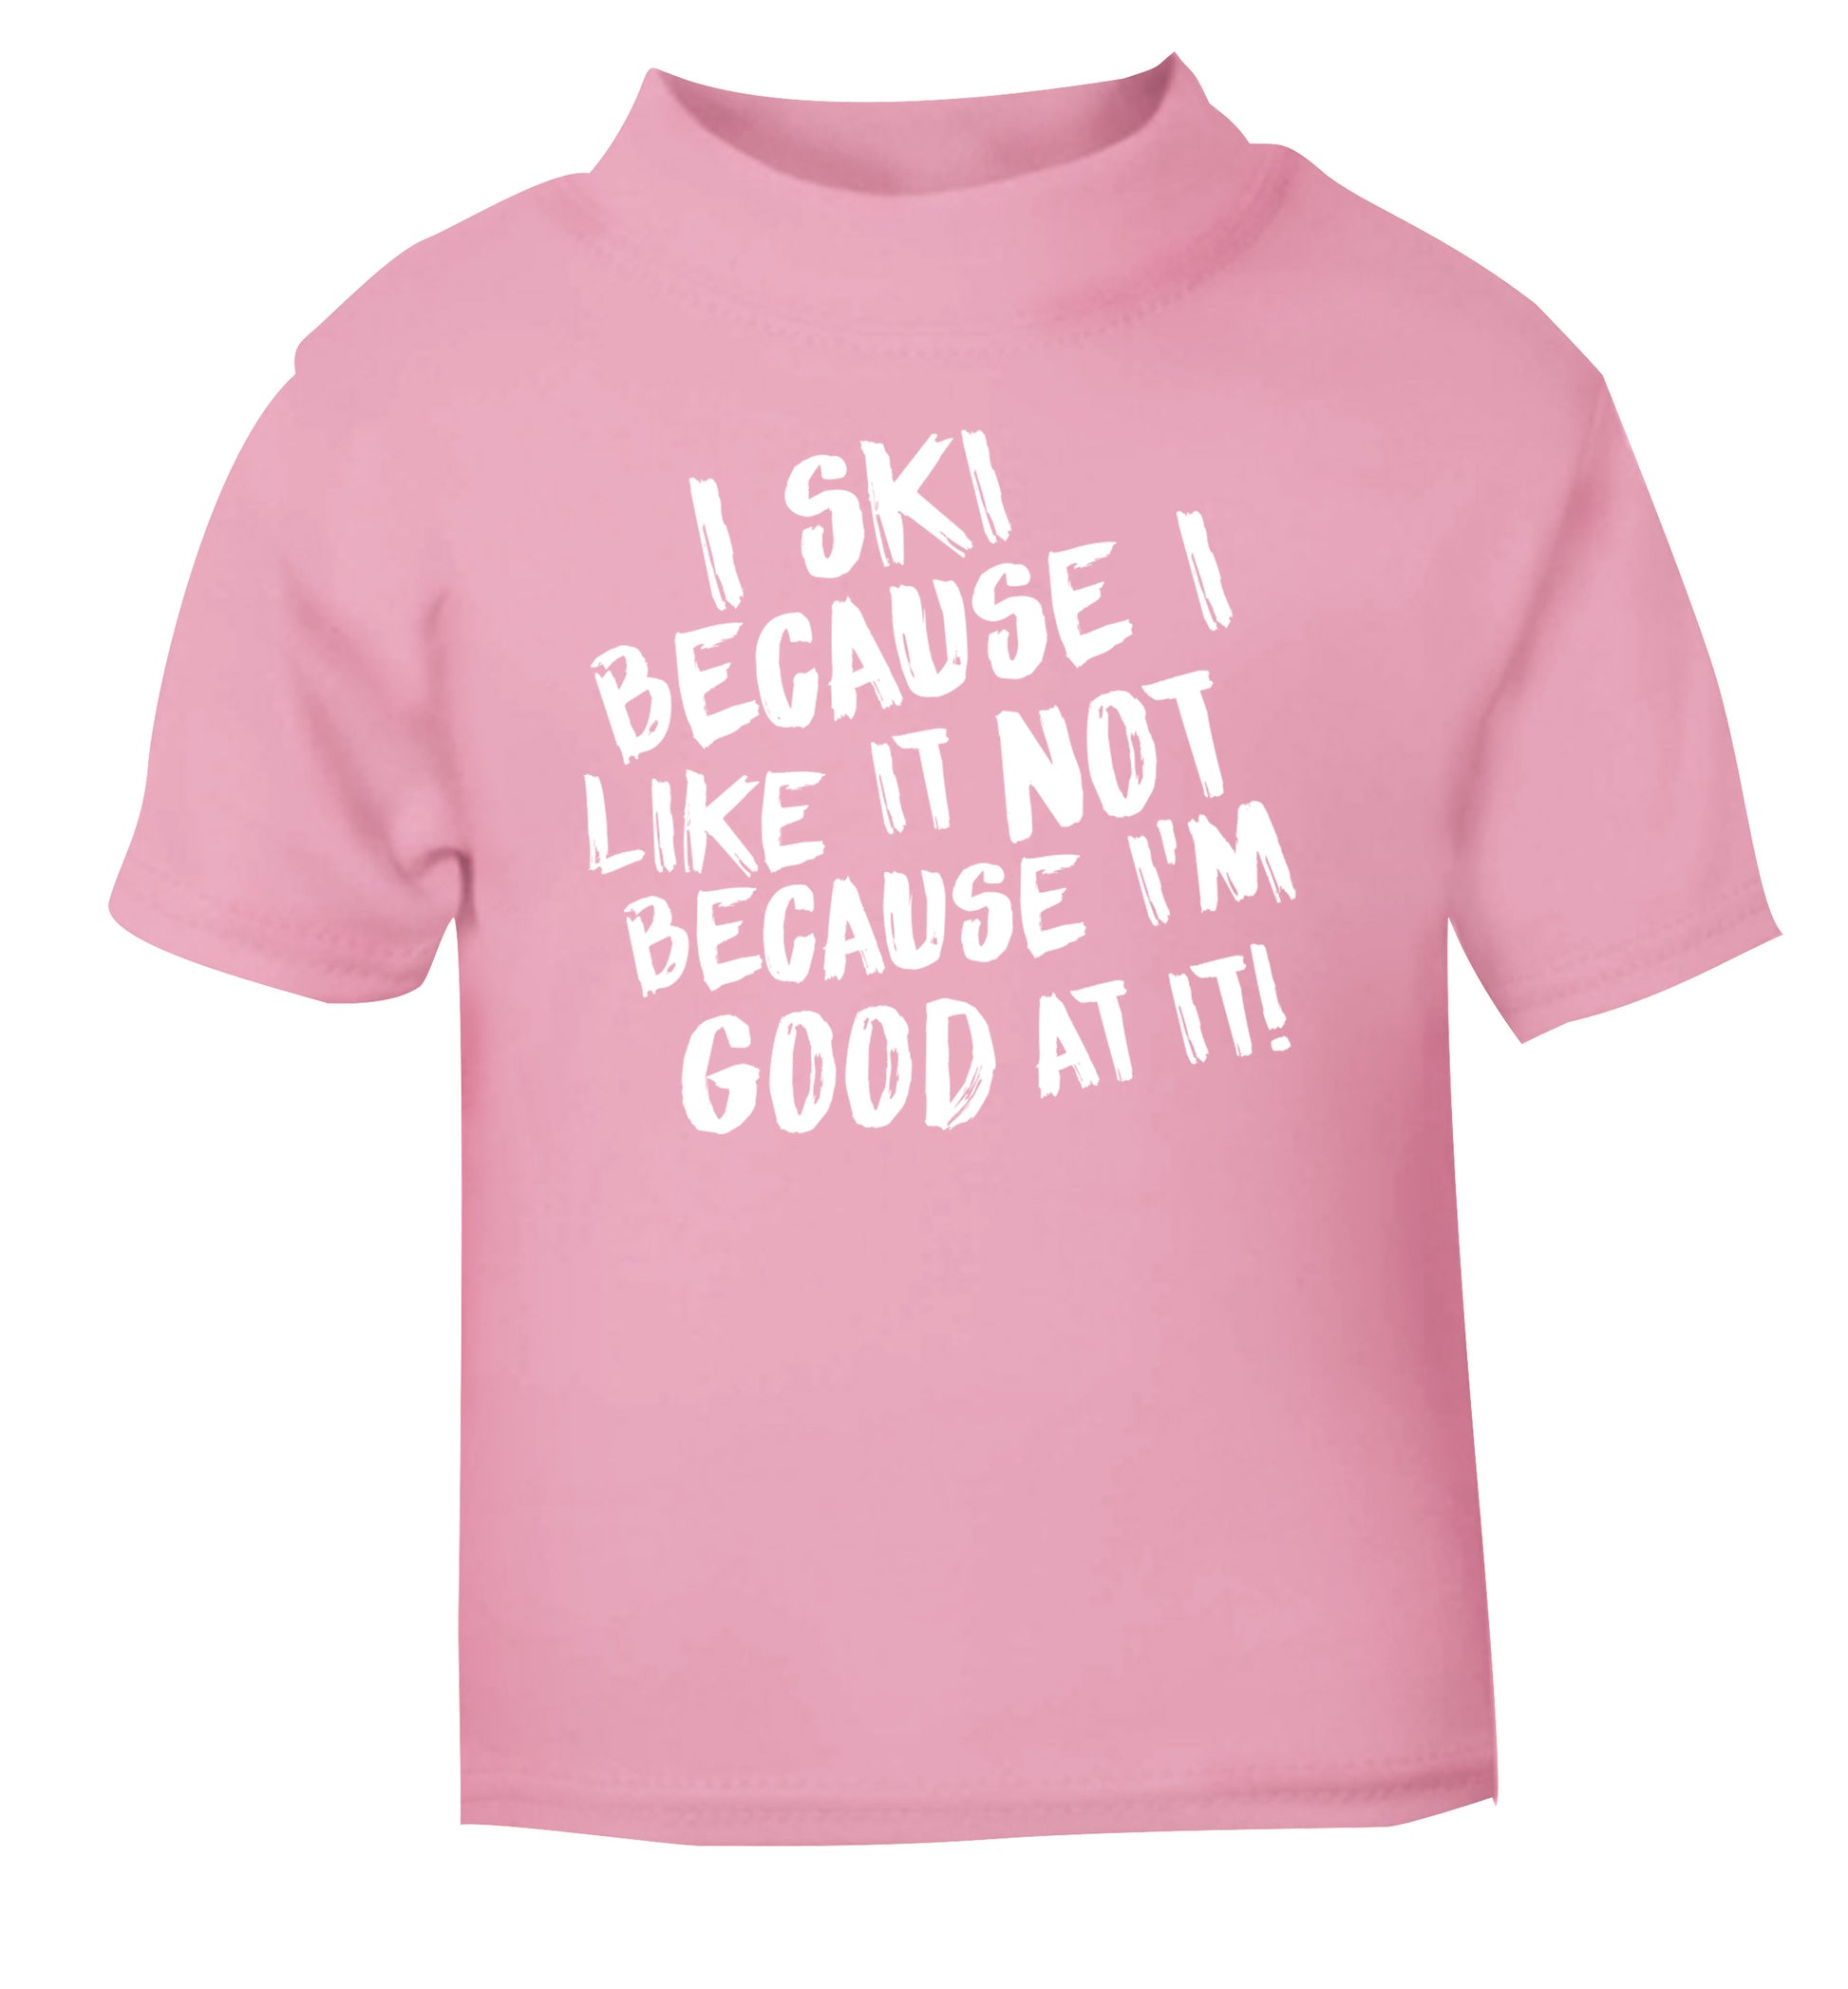 I ski because I like it not because I'm good at it light pink Baby Toddler Tshirt 2 Years